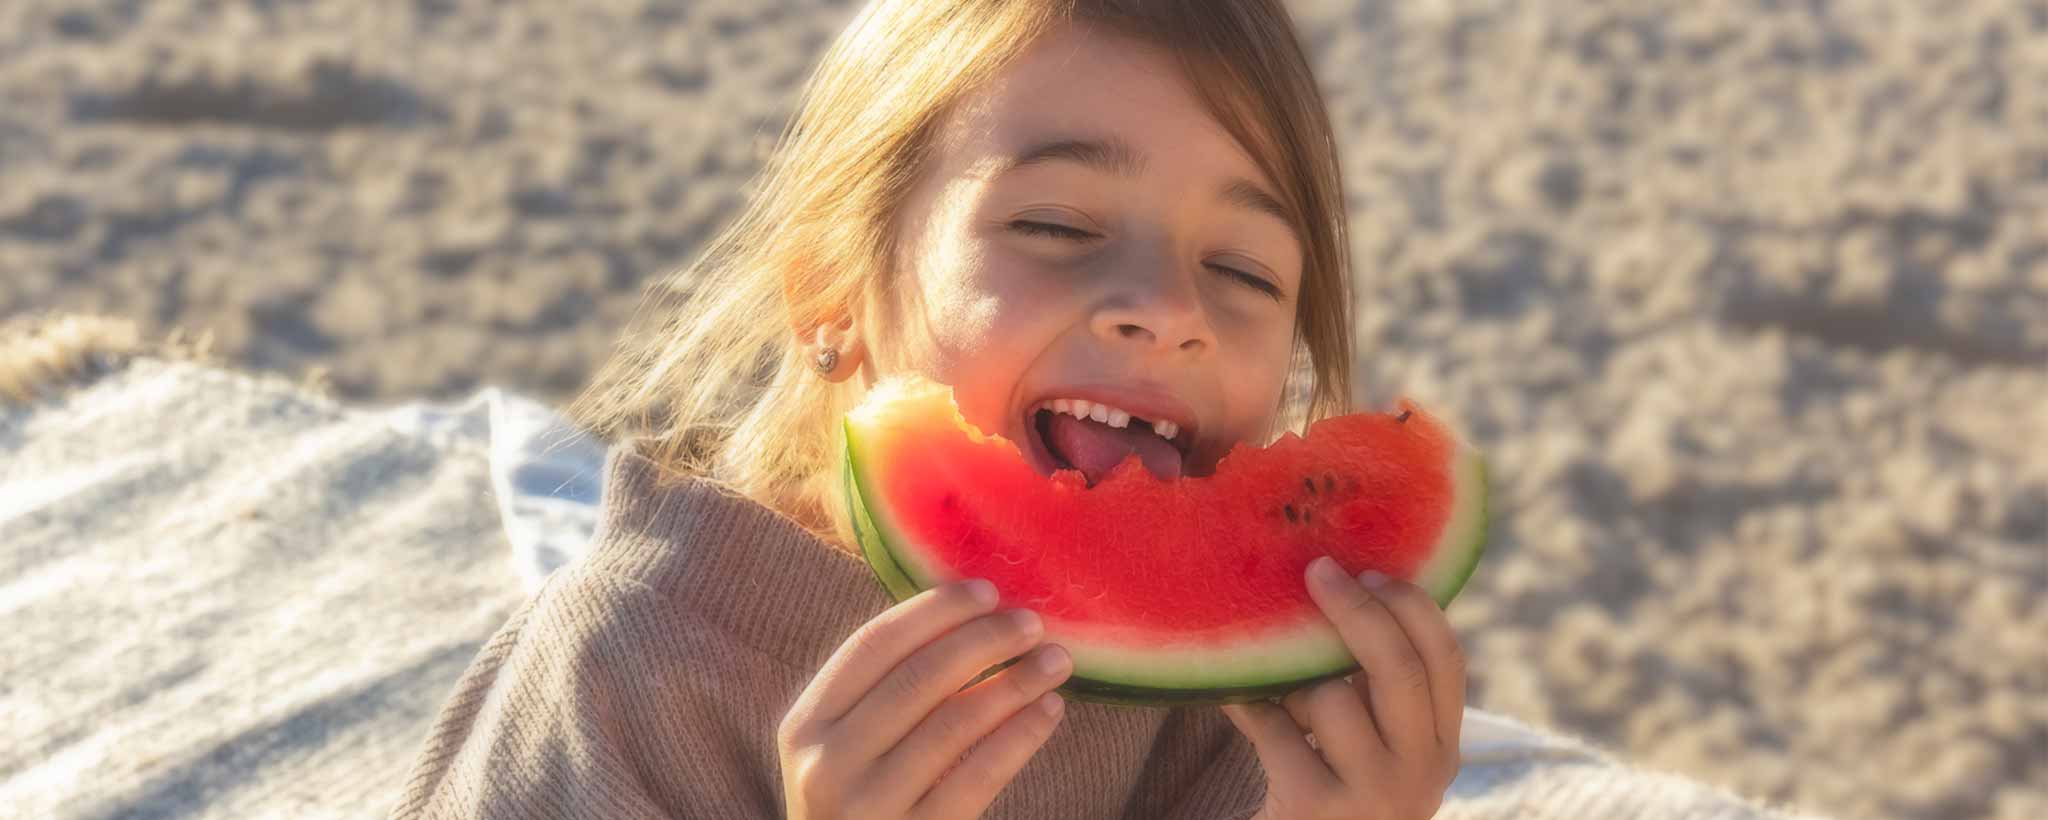 'Blonde girl eating watermelon on beach to help maintain healthy body weight'